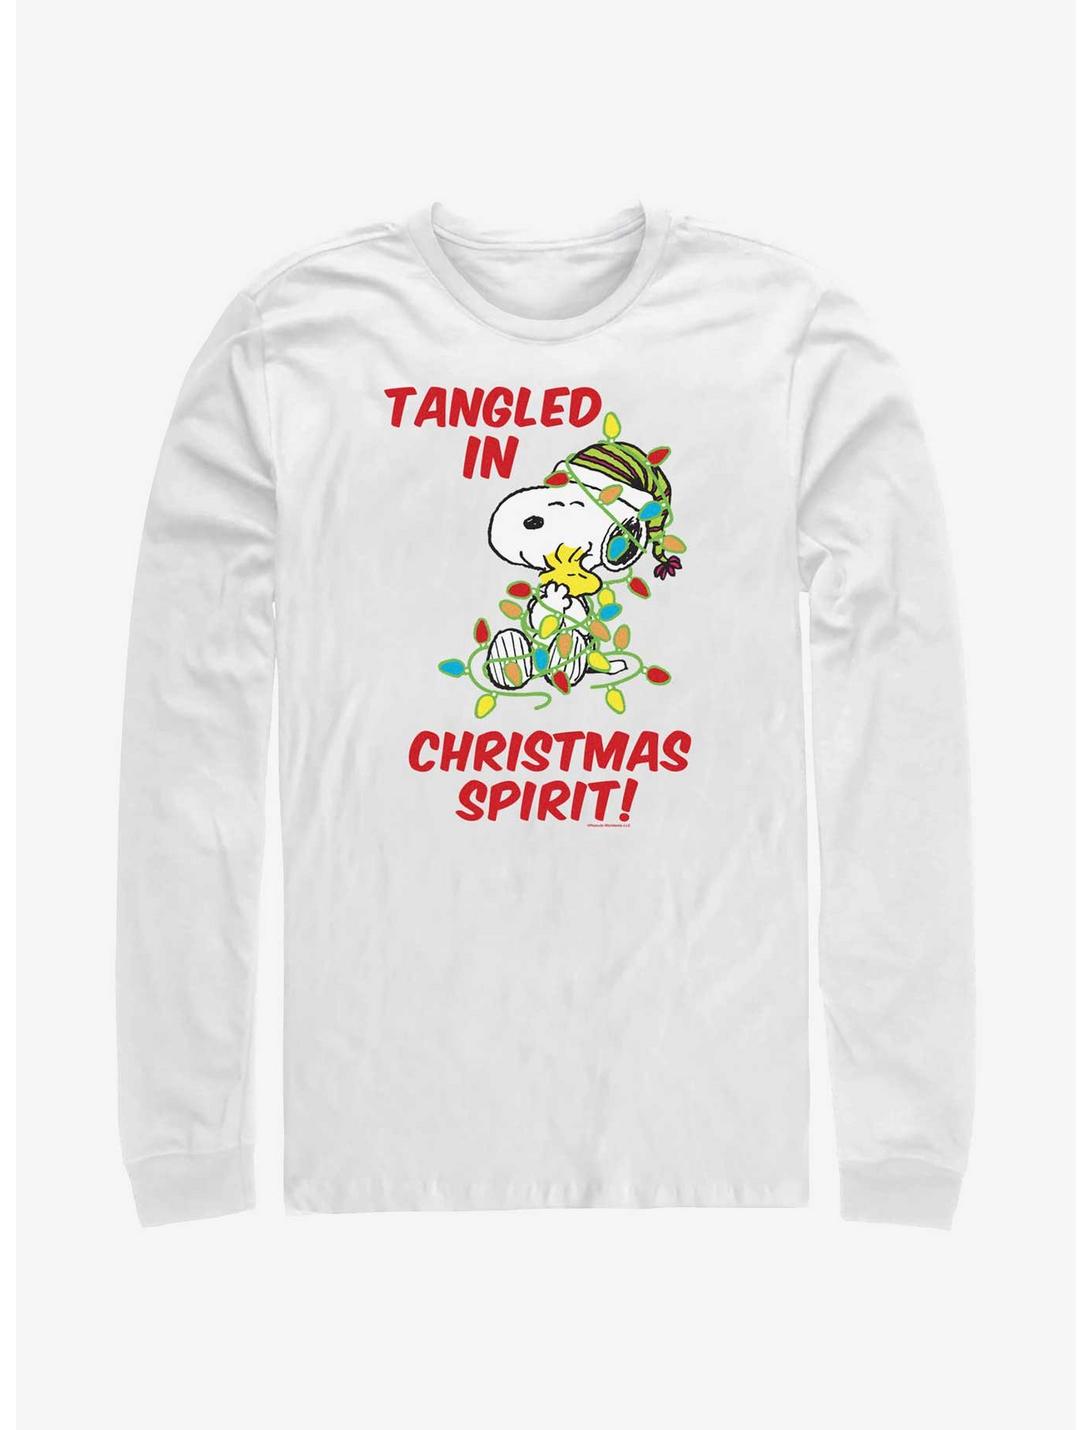 Peanuts Snoopy Tangled In Christmas Spirit Long-Sleeve T-Shirt, WHITE, hi-res